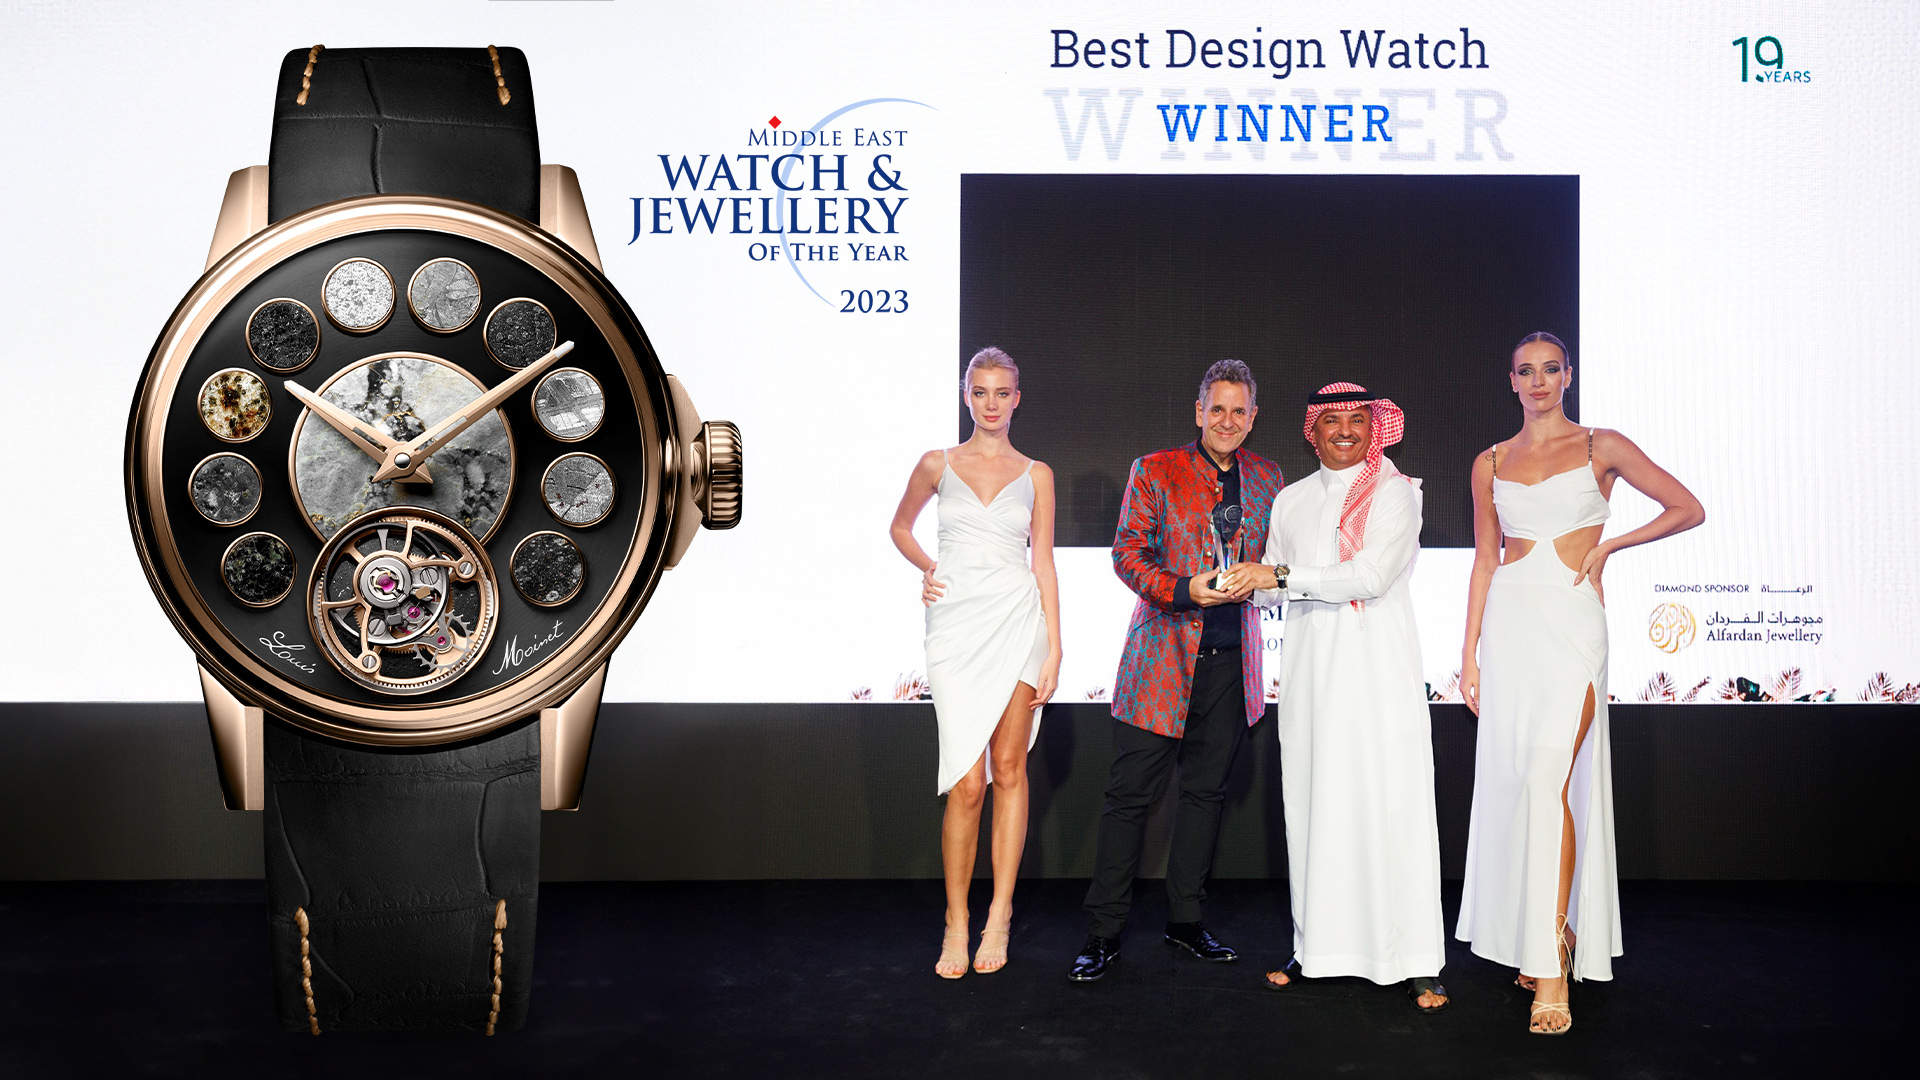 Louis Moinet Cosmopolis wins Best Design Watch award at Middle East Watch & Jewellery of the Year Awards